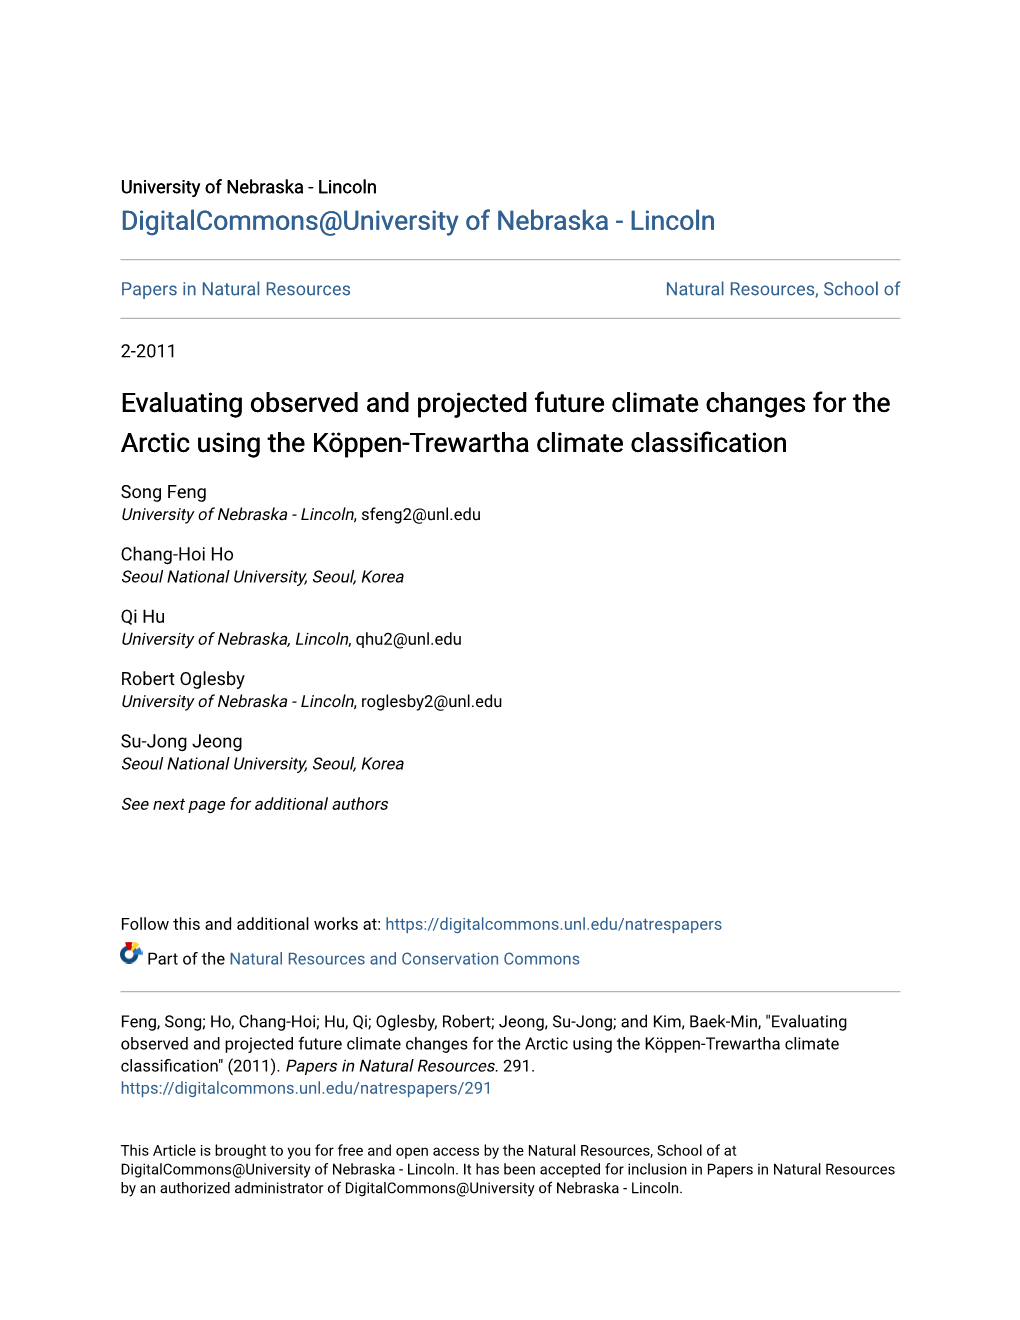 Evaluating Observed and Projected Future Climate Changes for the Arctic Using the Köppen-Trewartha Climate Classification